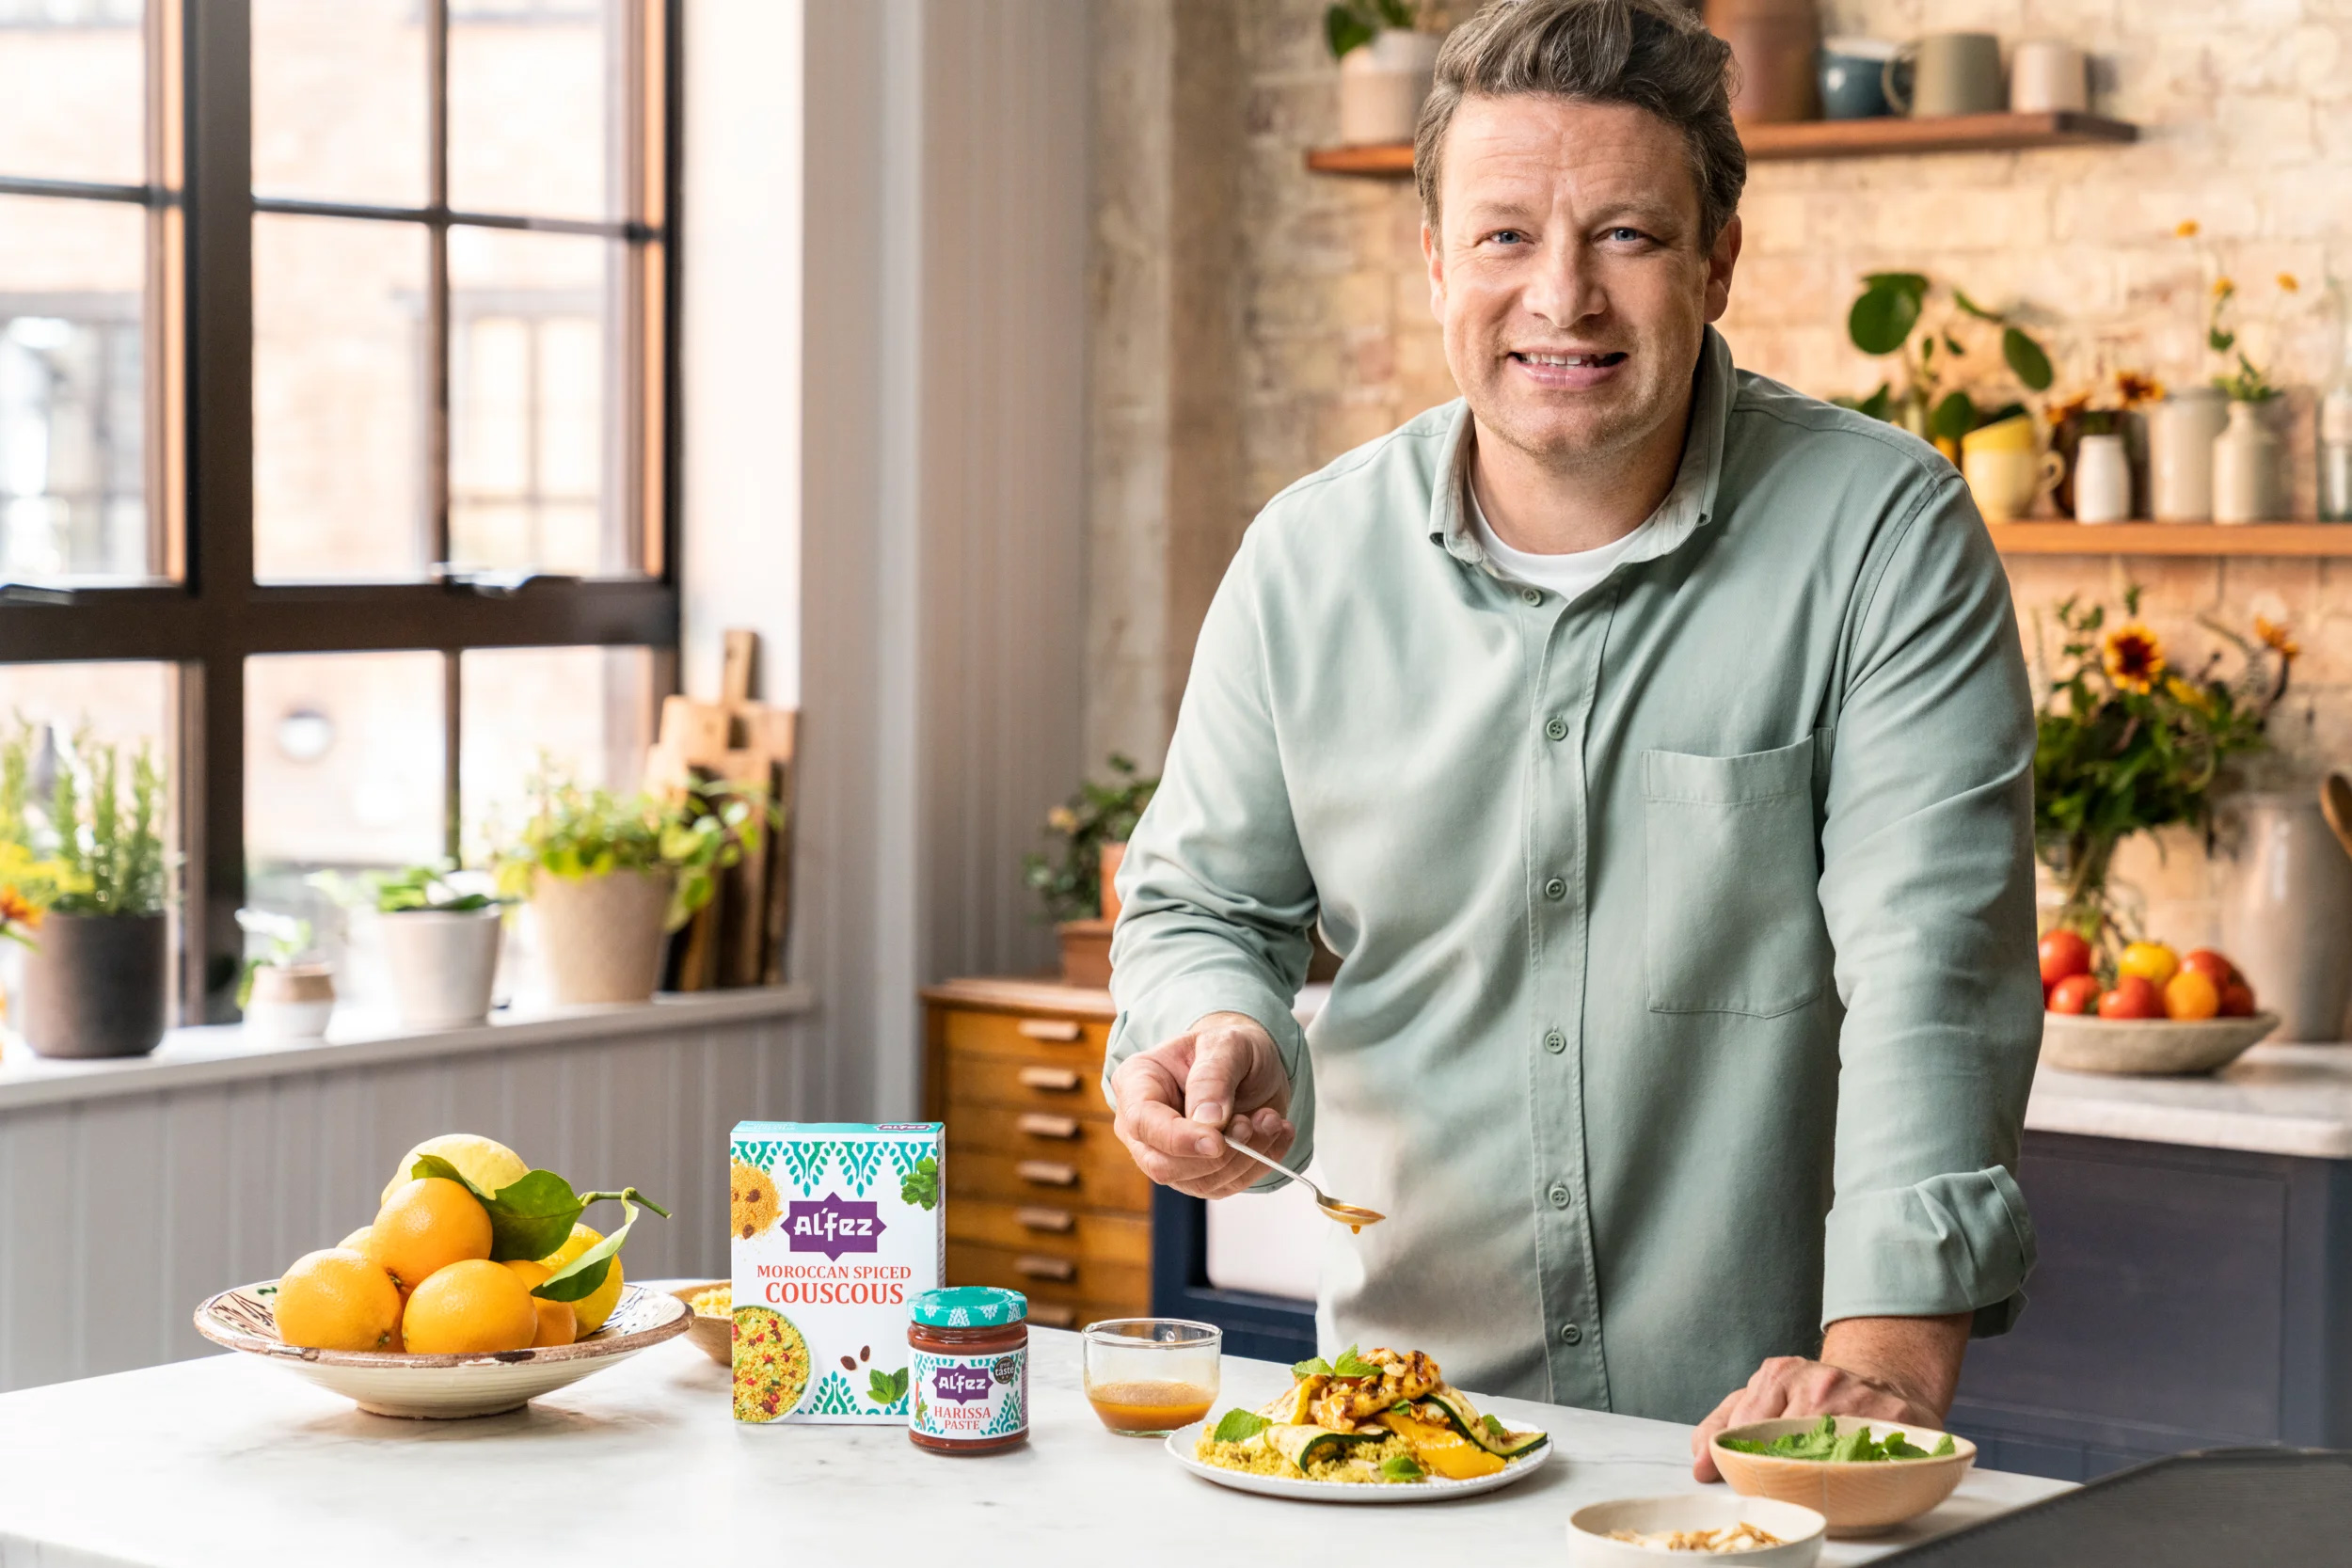 Jamie Oliver in a kitchen with Al'Fez products